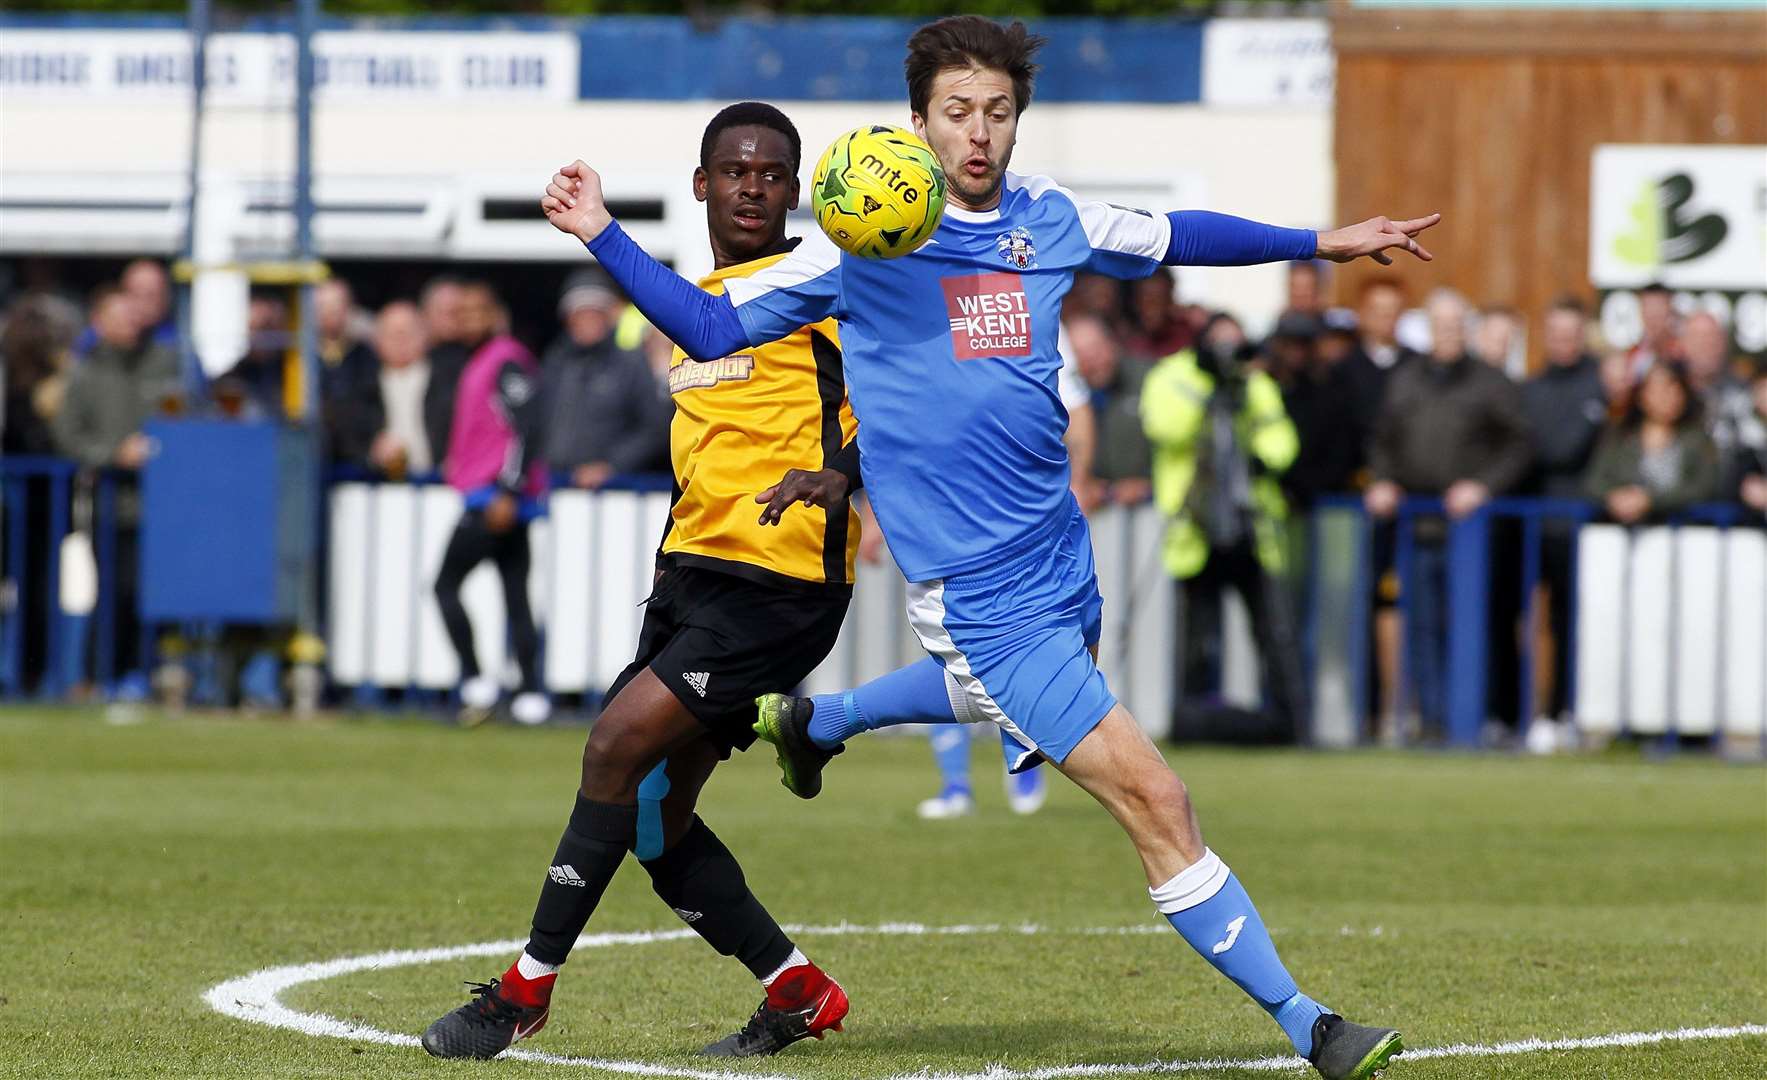 Joe Healy made his debut for Tonbridge in the Bostik Premier play-off final against Merstham. Picture: Sean Aidan